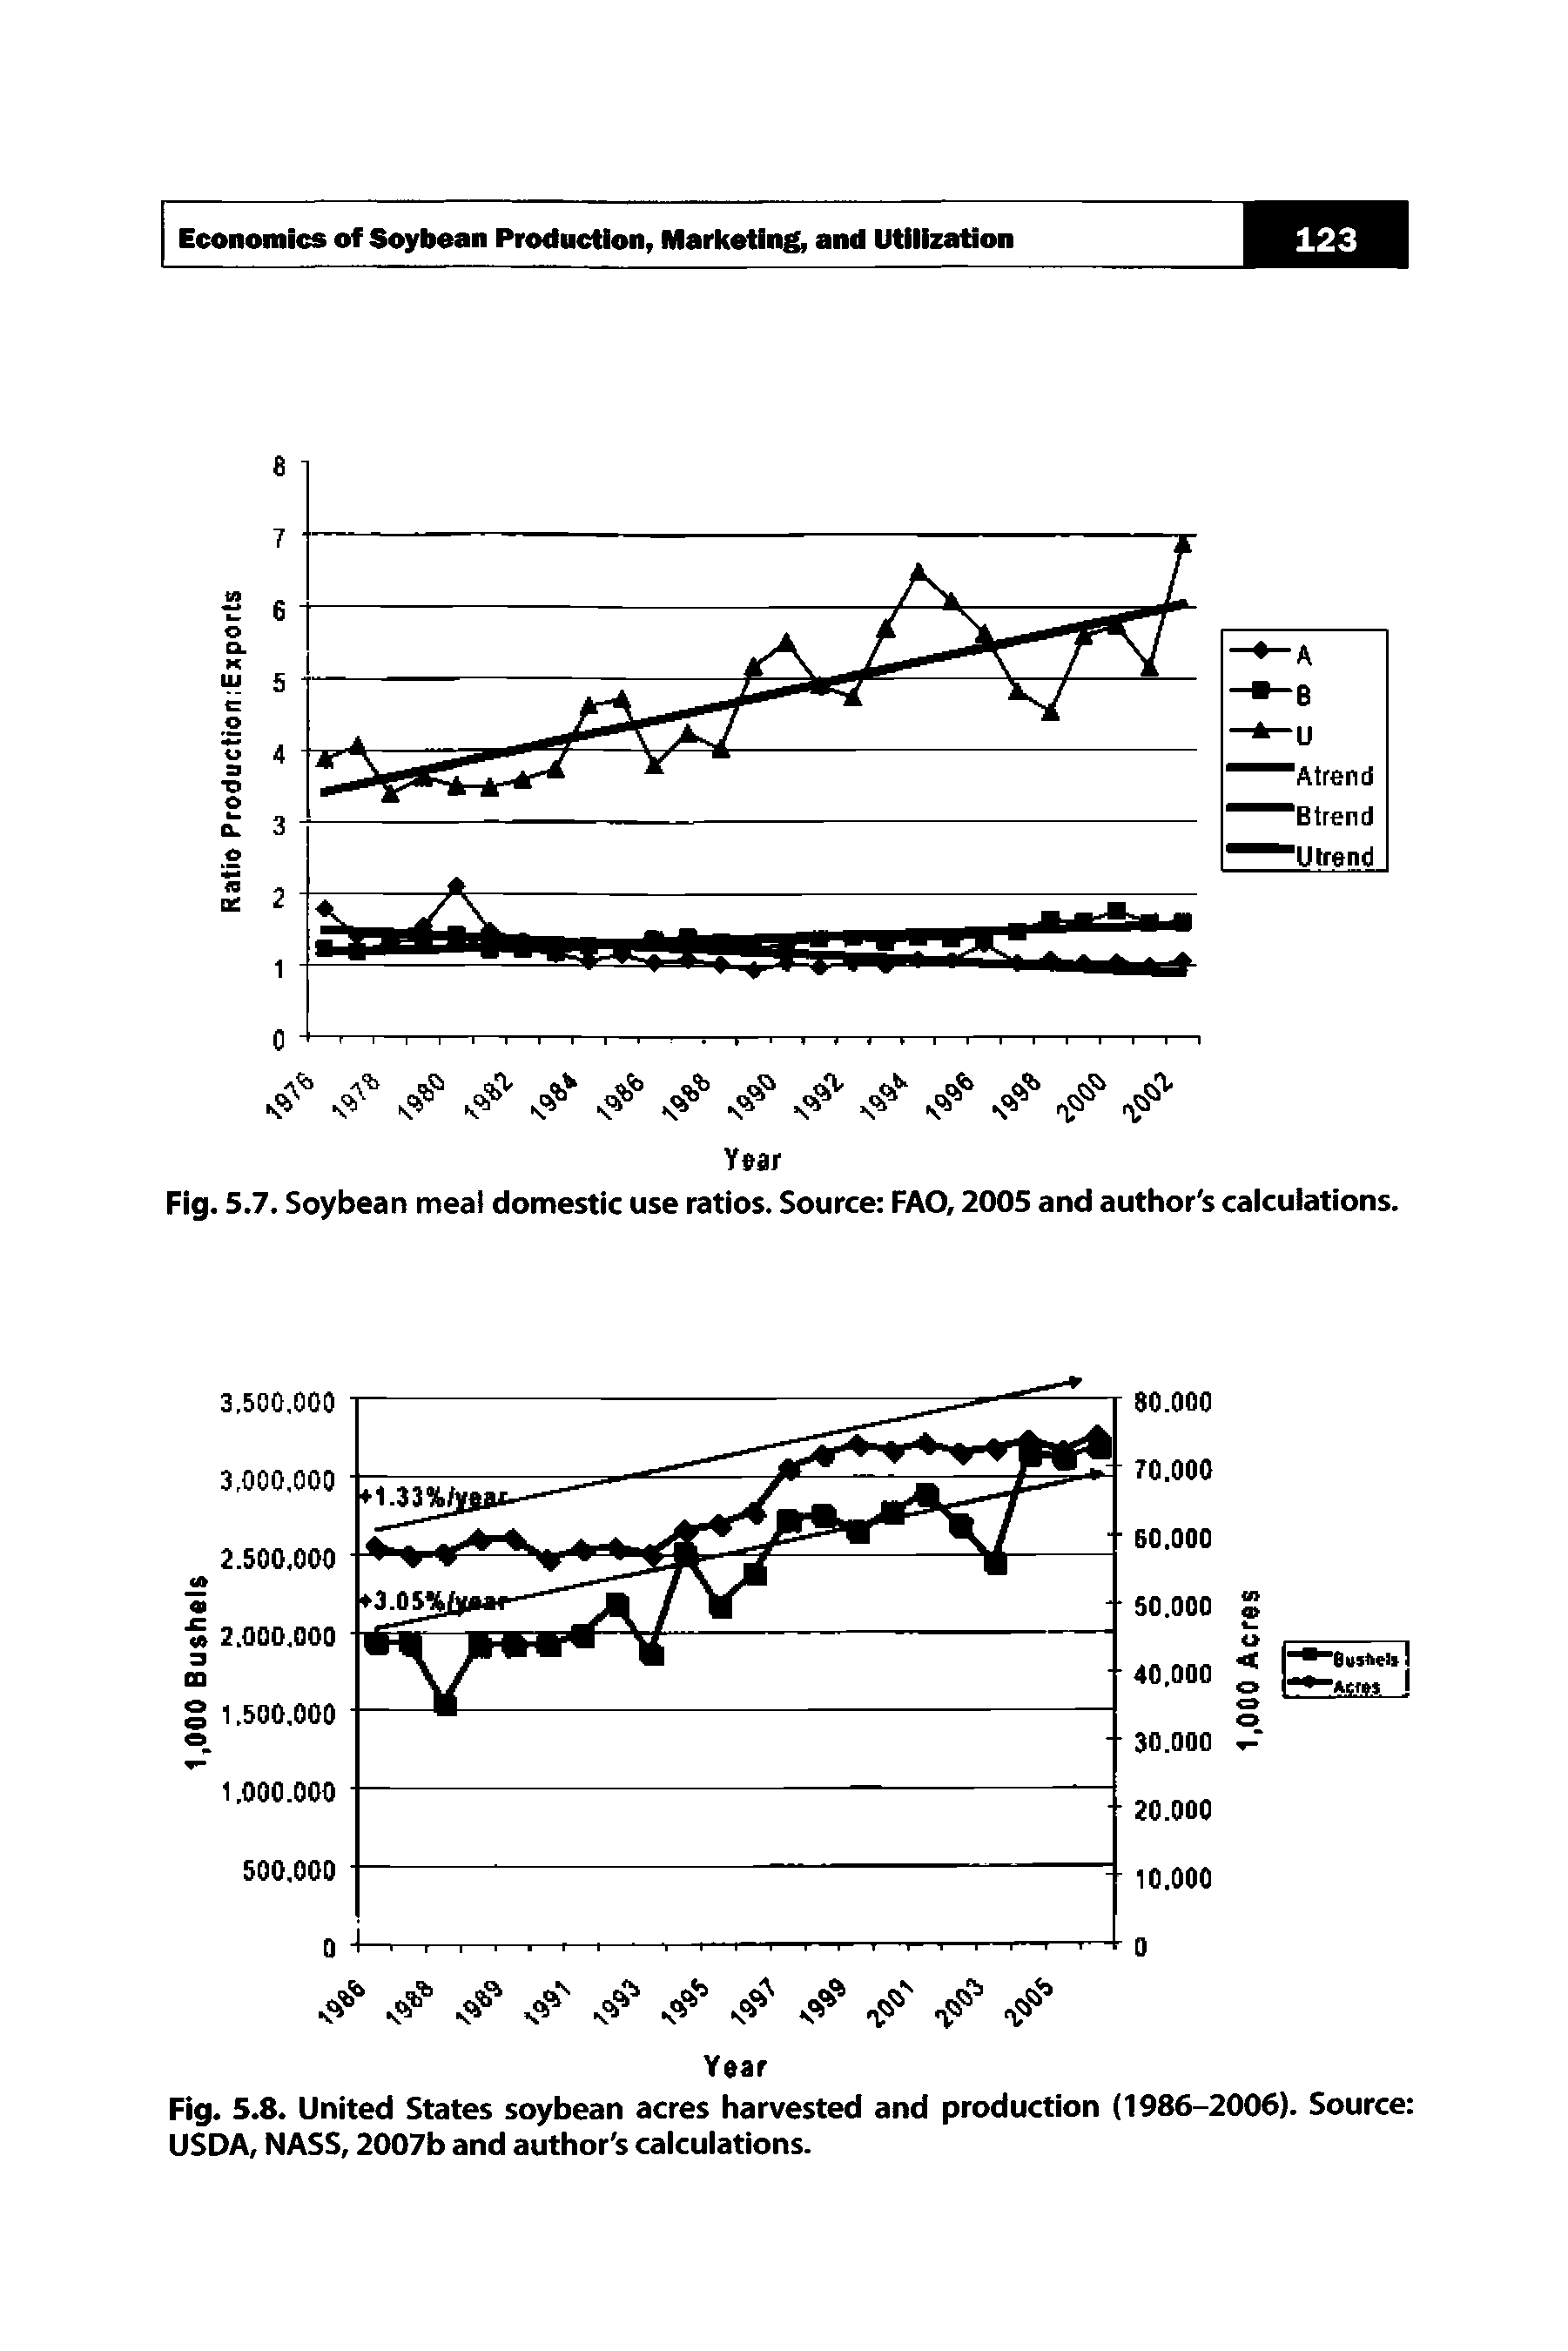 Fig. 5.8. United States soybean acres harvested and production (1986-2006). Source USDA, NASS, 2007b and author s calculations.